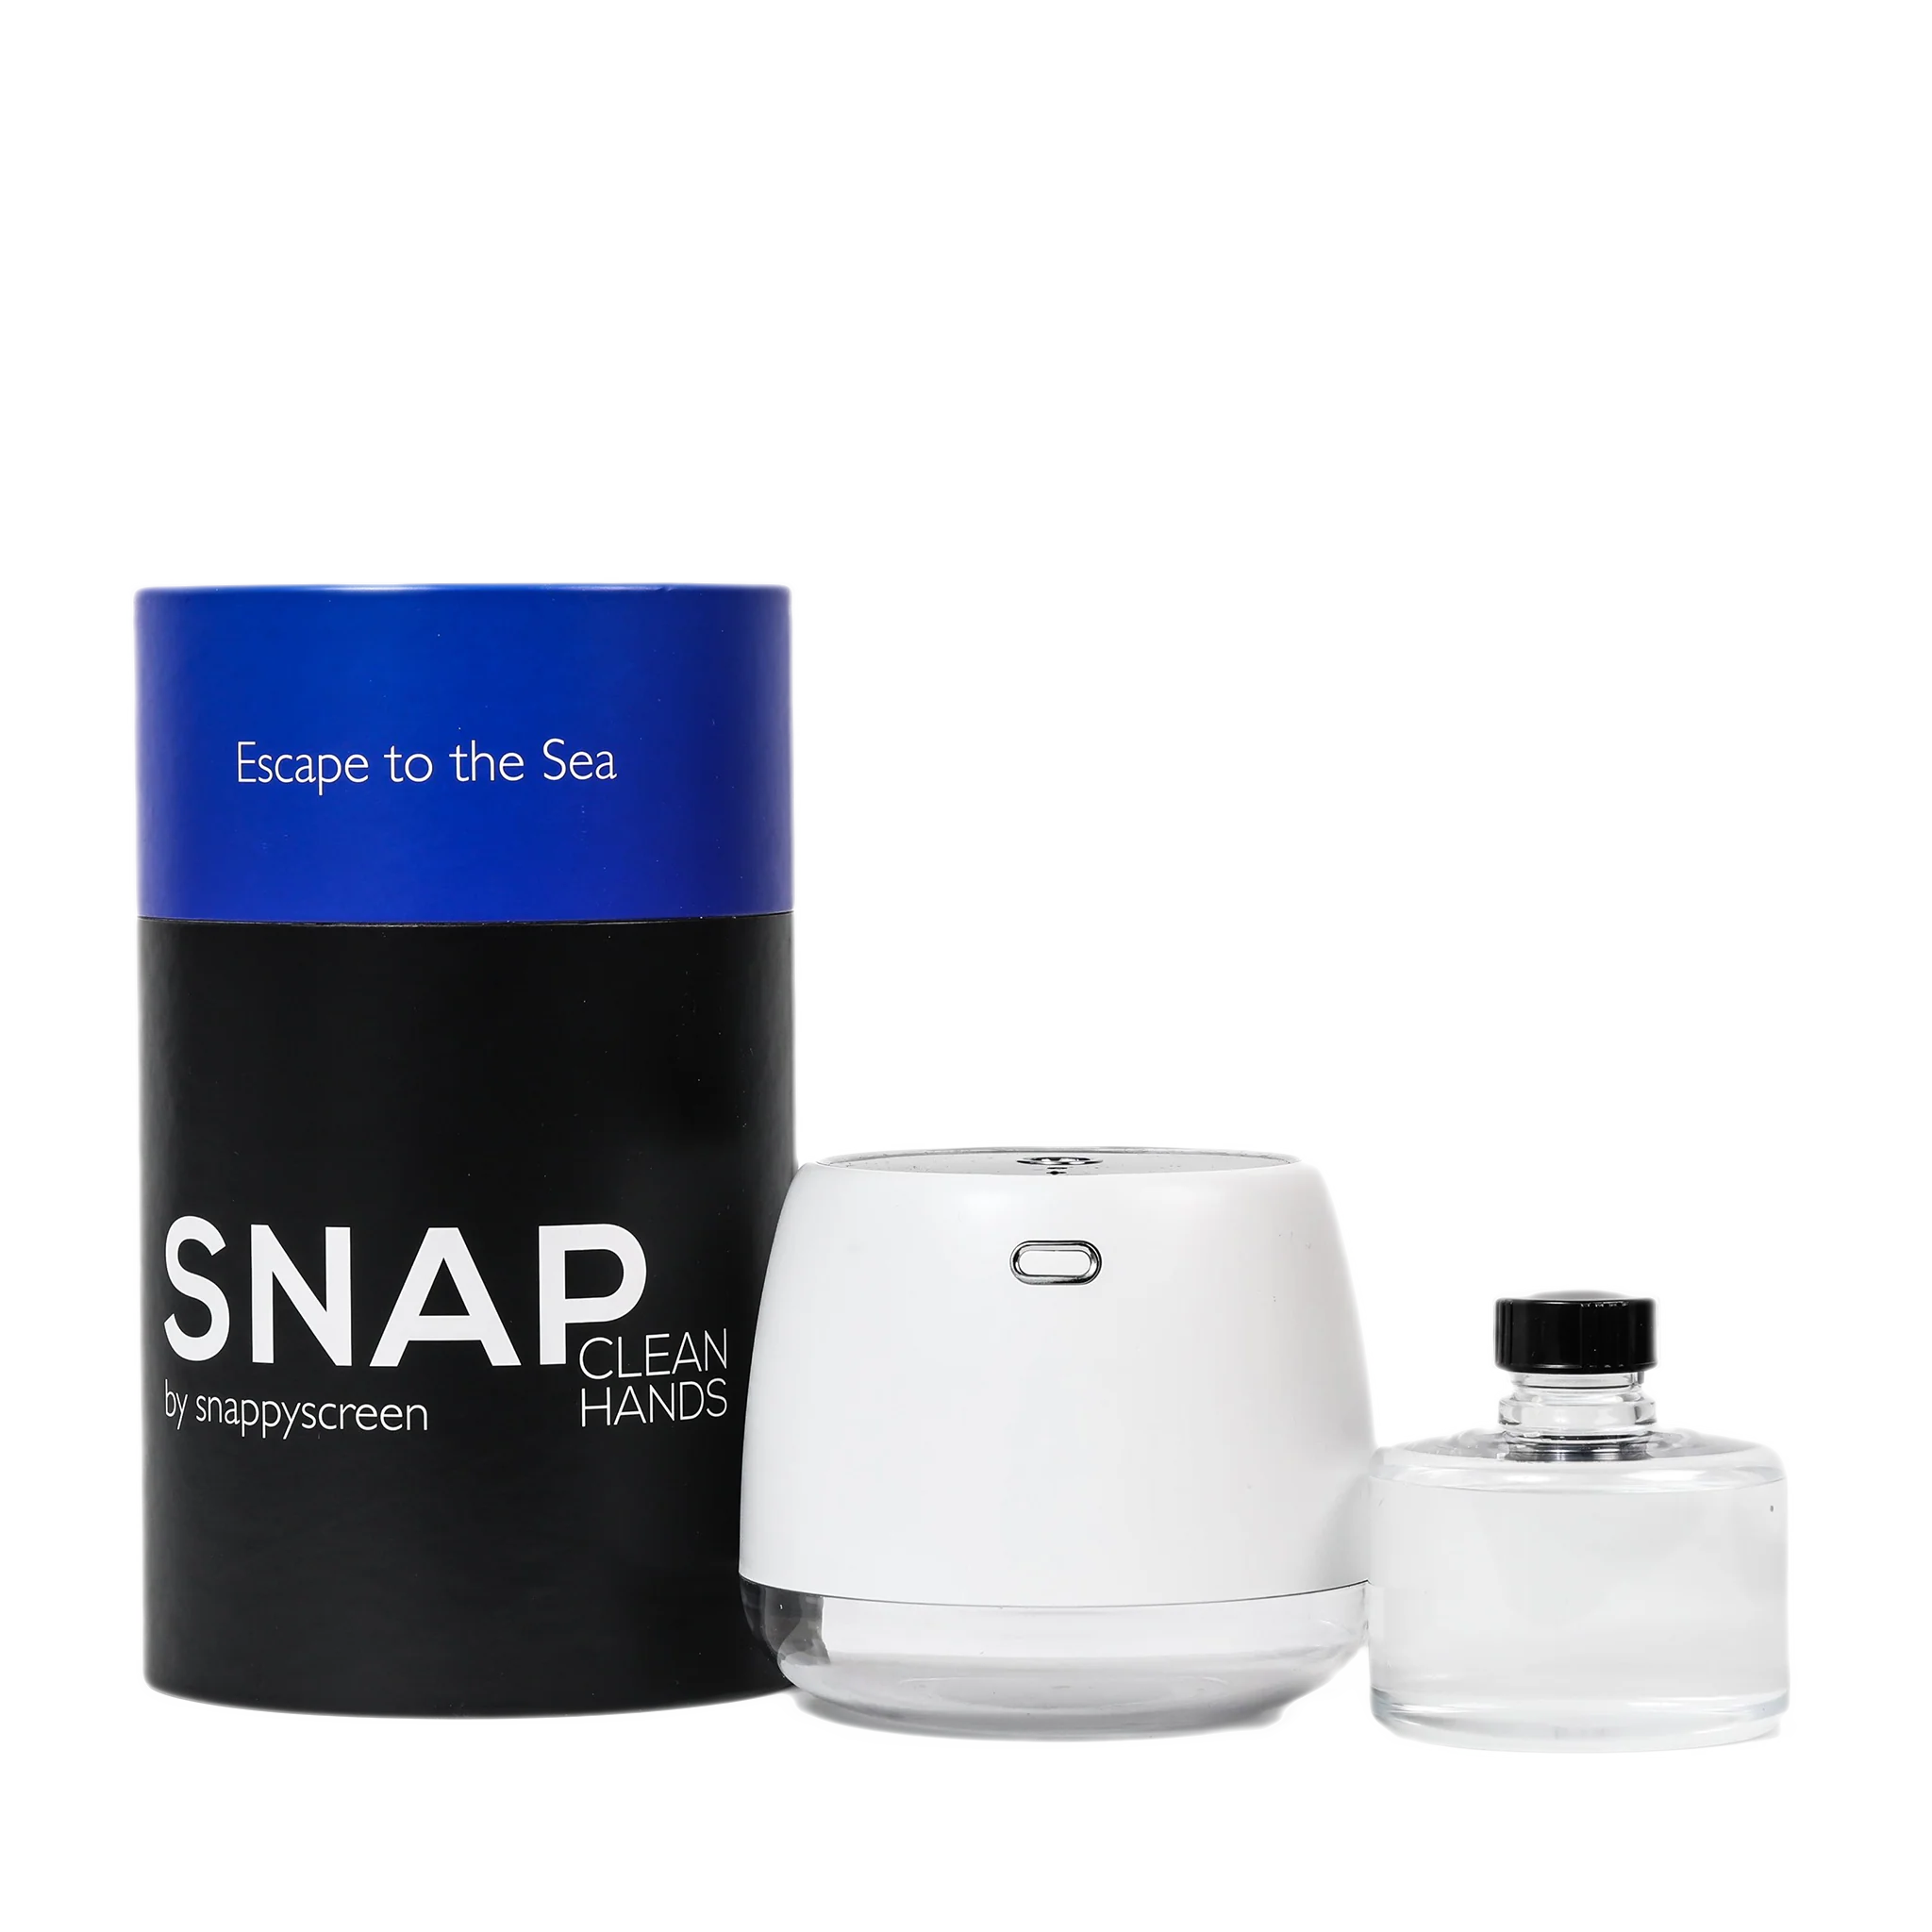 Snap Touchless Mist Sanitizer Device- Escape to the Sea